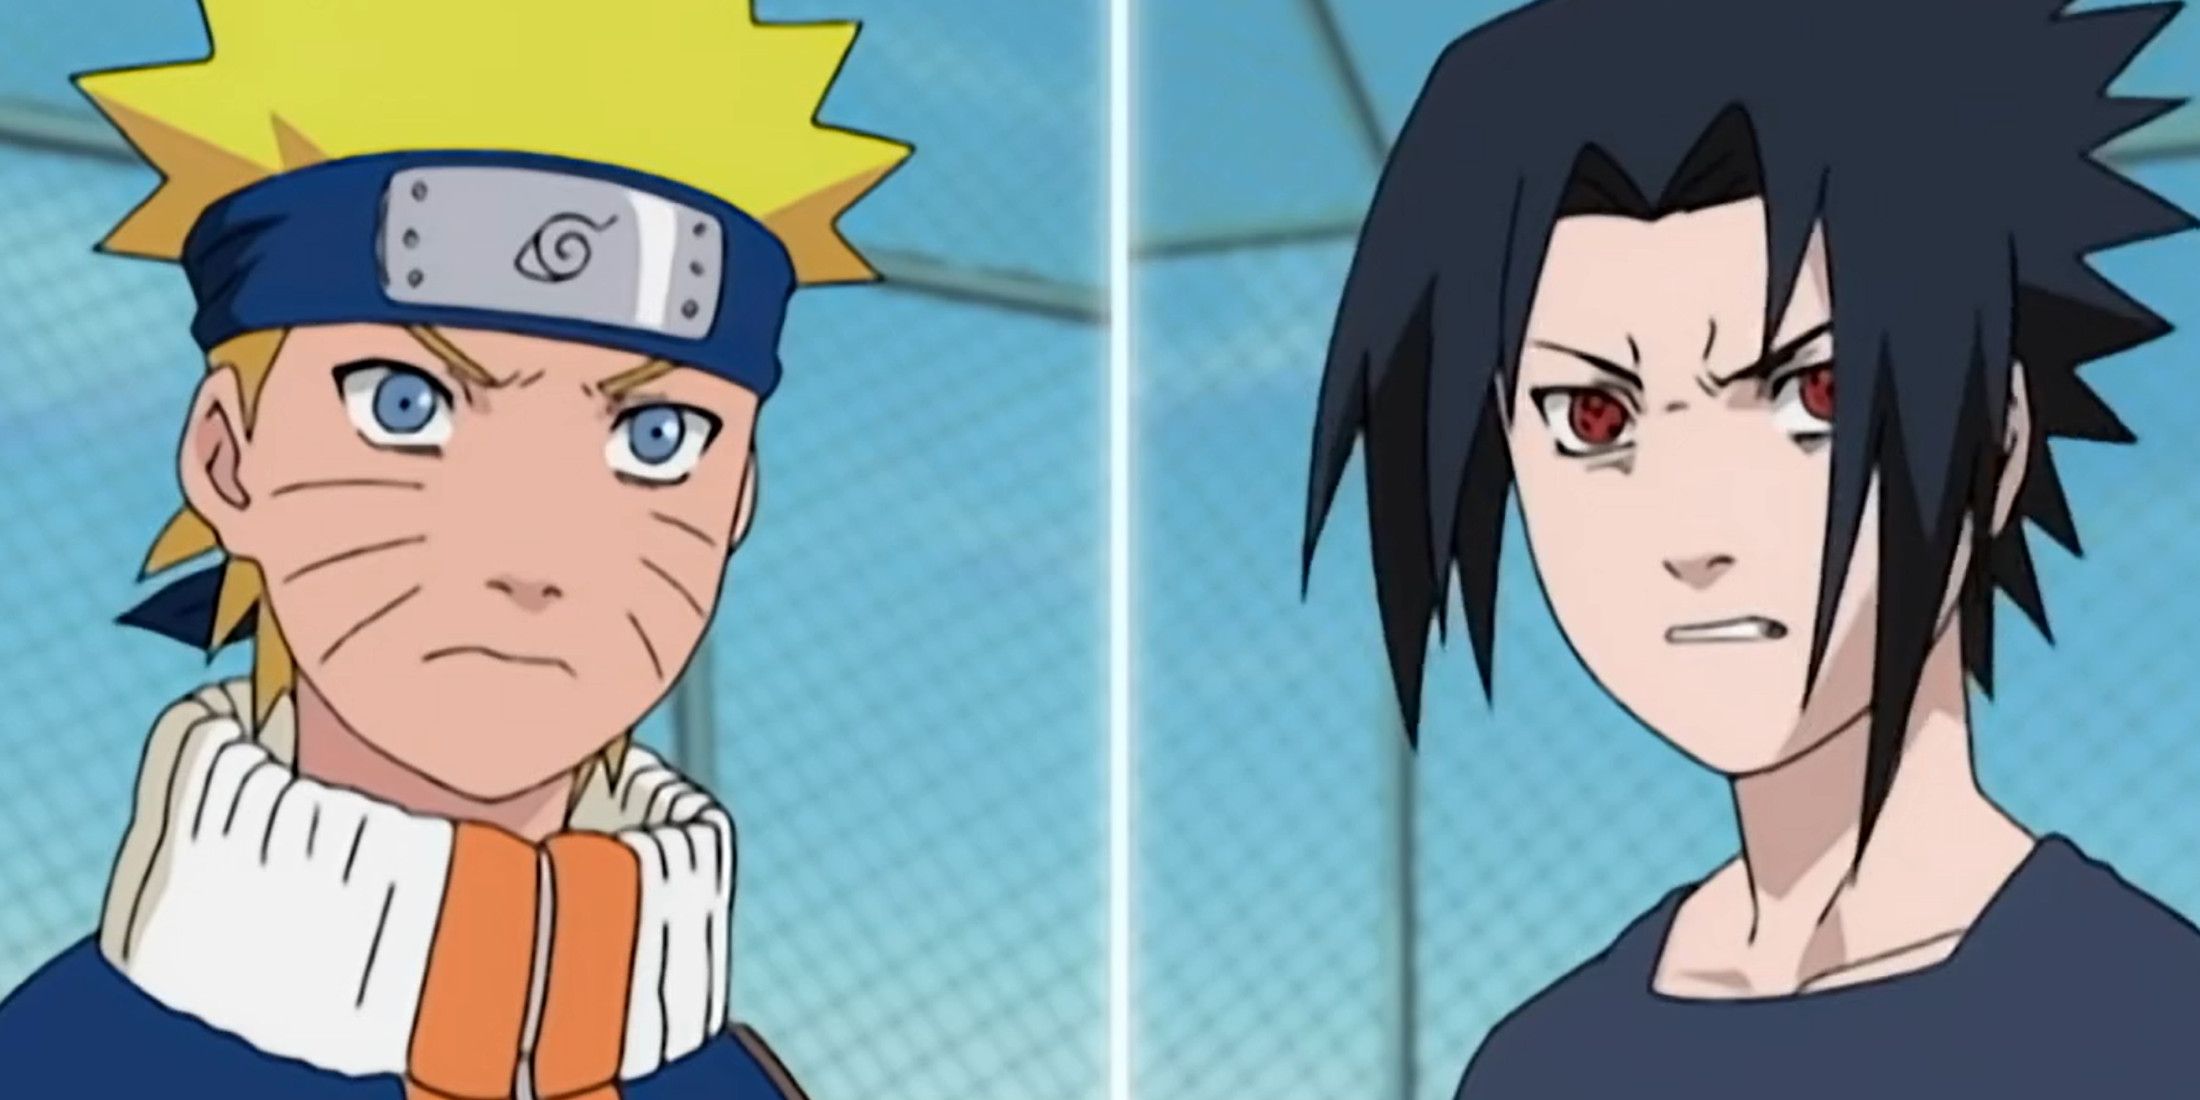 Naruto and Sasuke face off on the hospital roof in Naruto